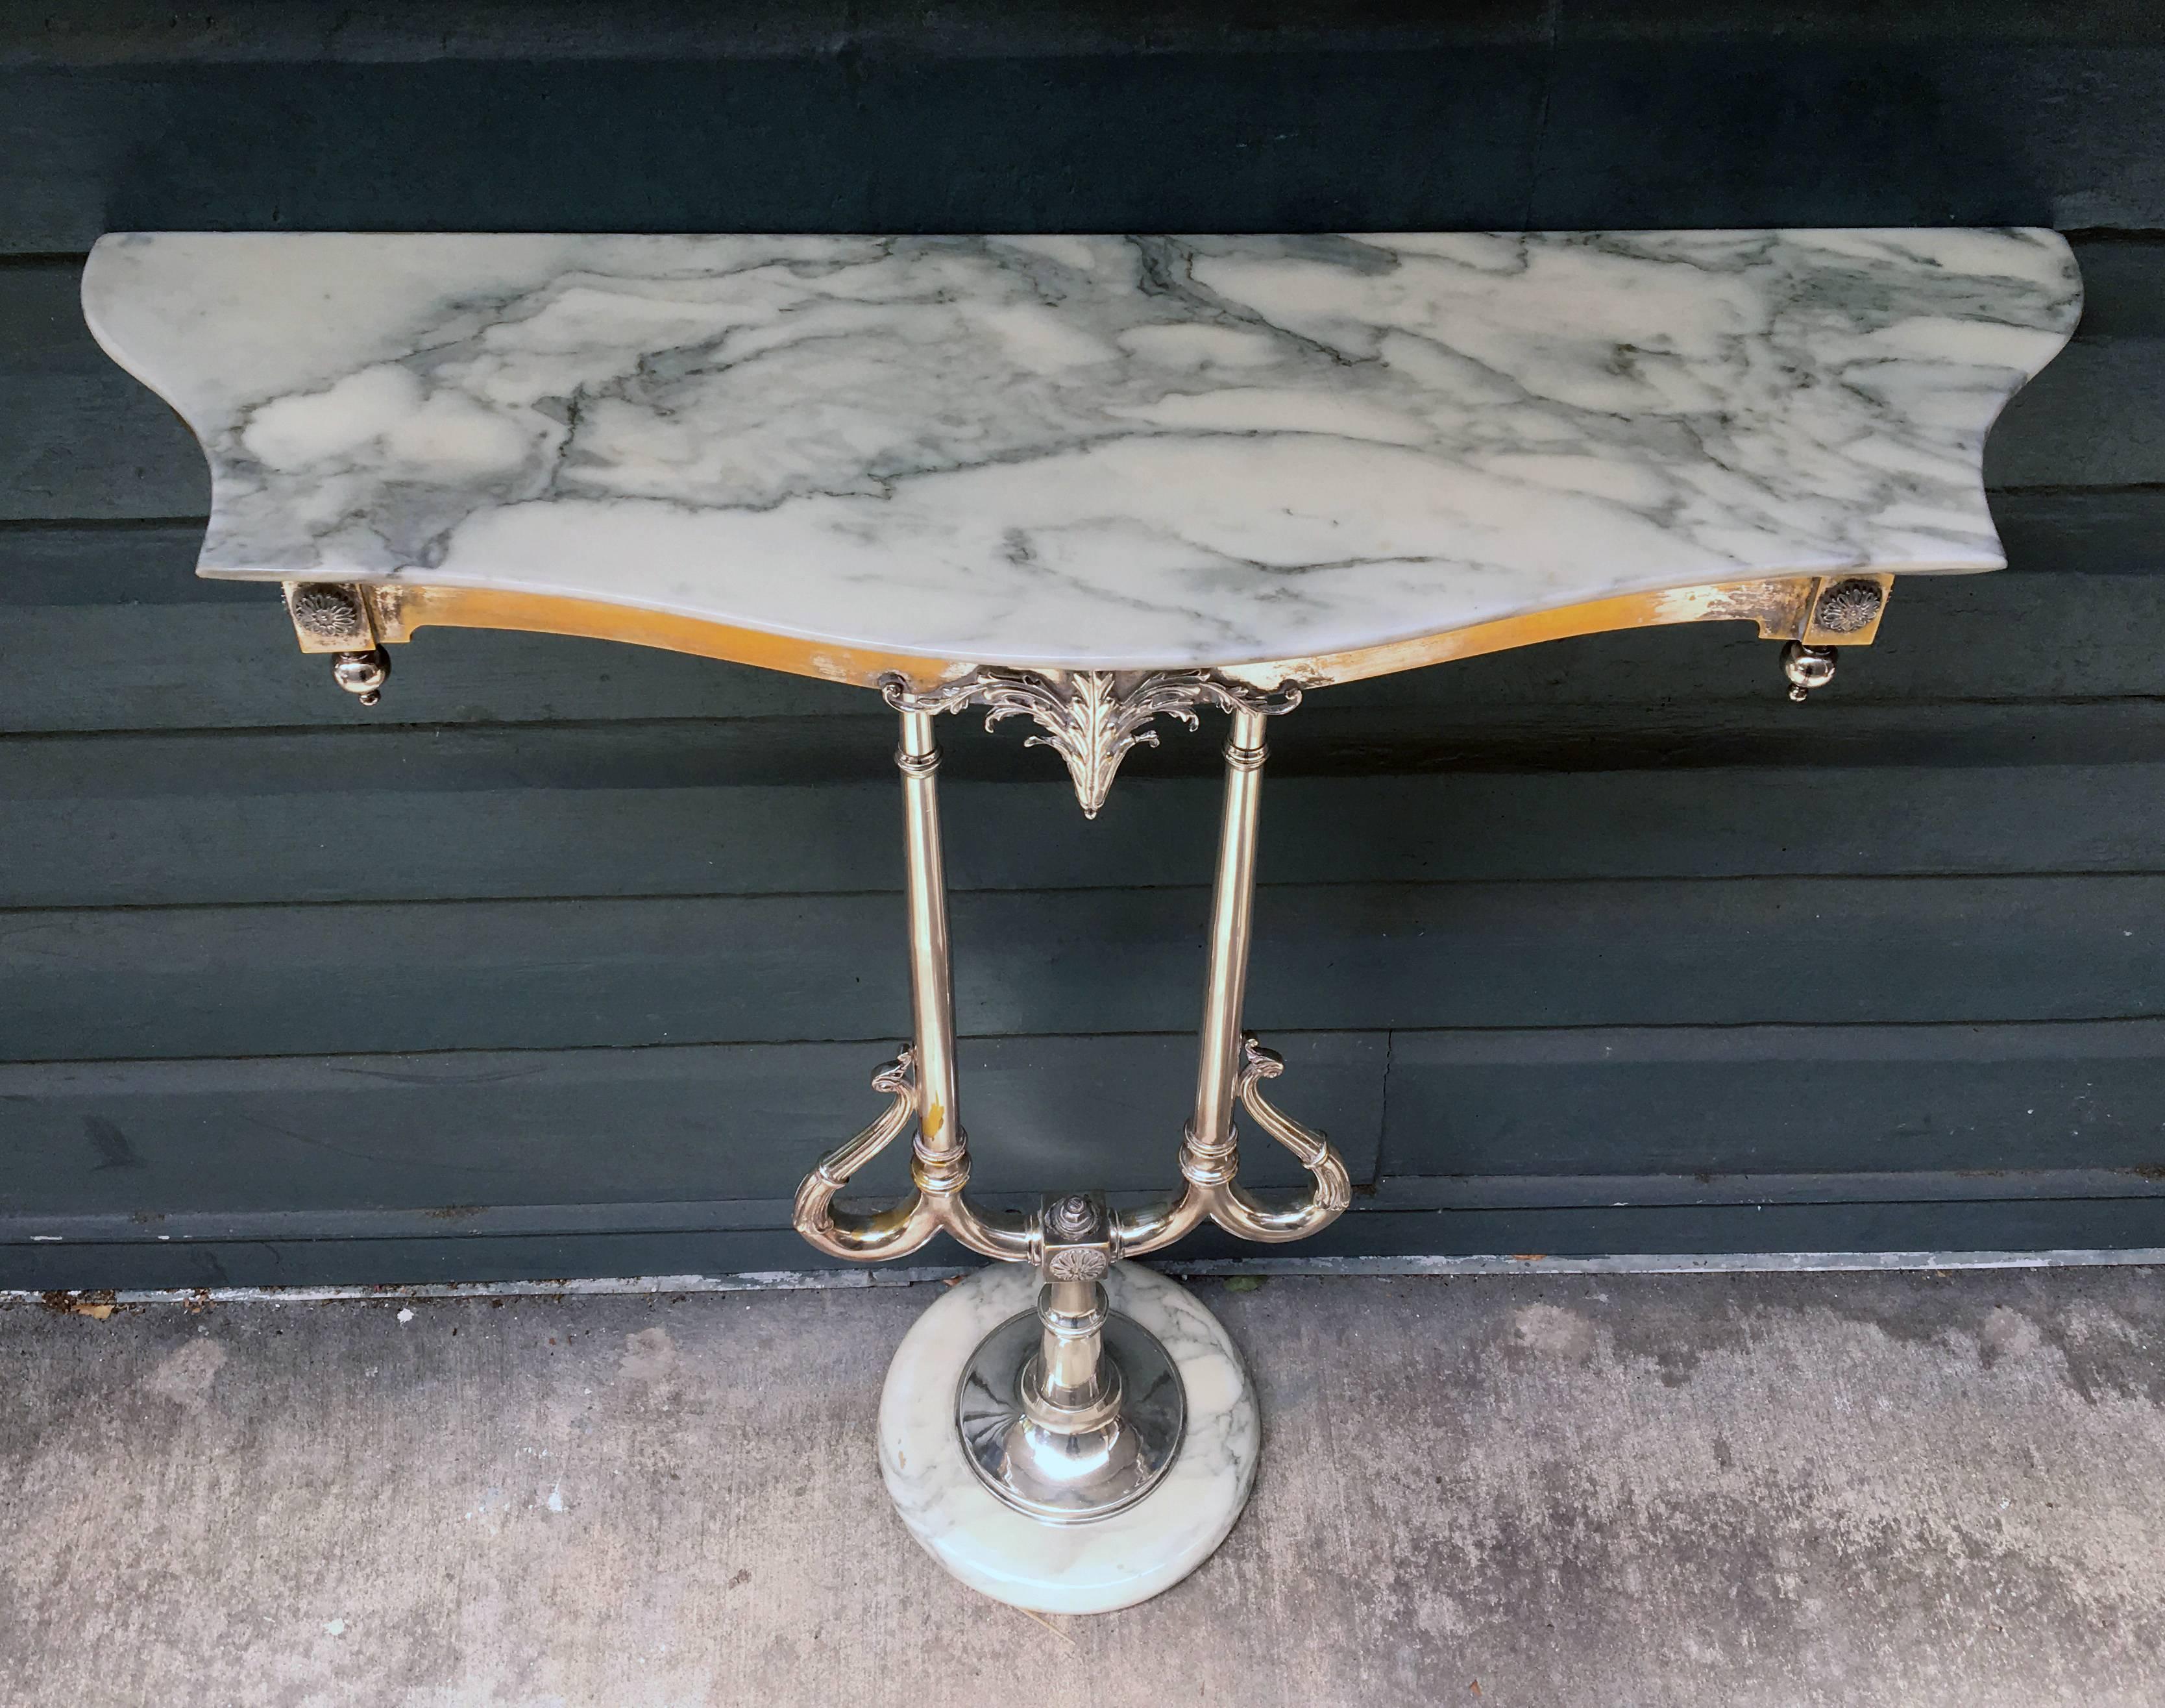 This turn of the century Art Nouveau console table has a beautiful marble top surrounded with brass and highlights of silver. This table has a silver plated over bronze lyre shaped leg.